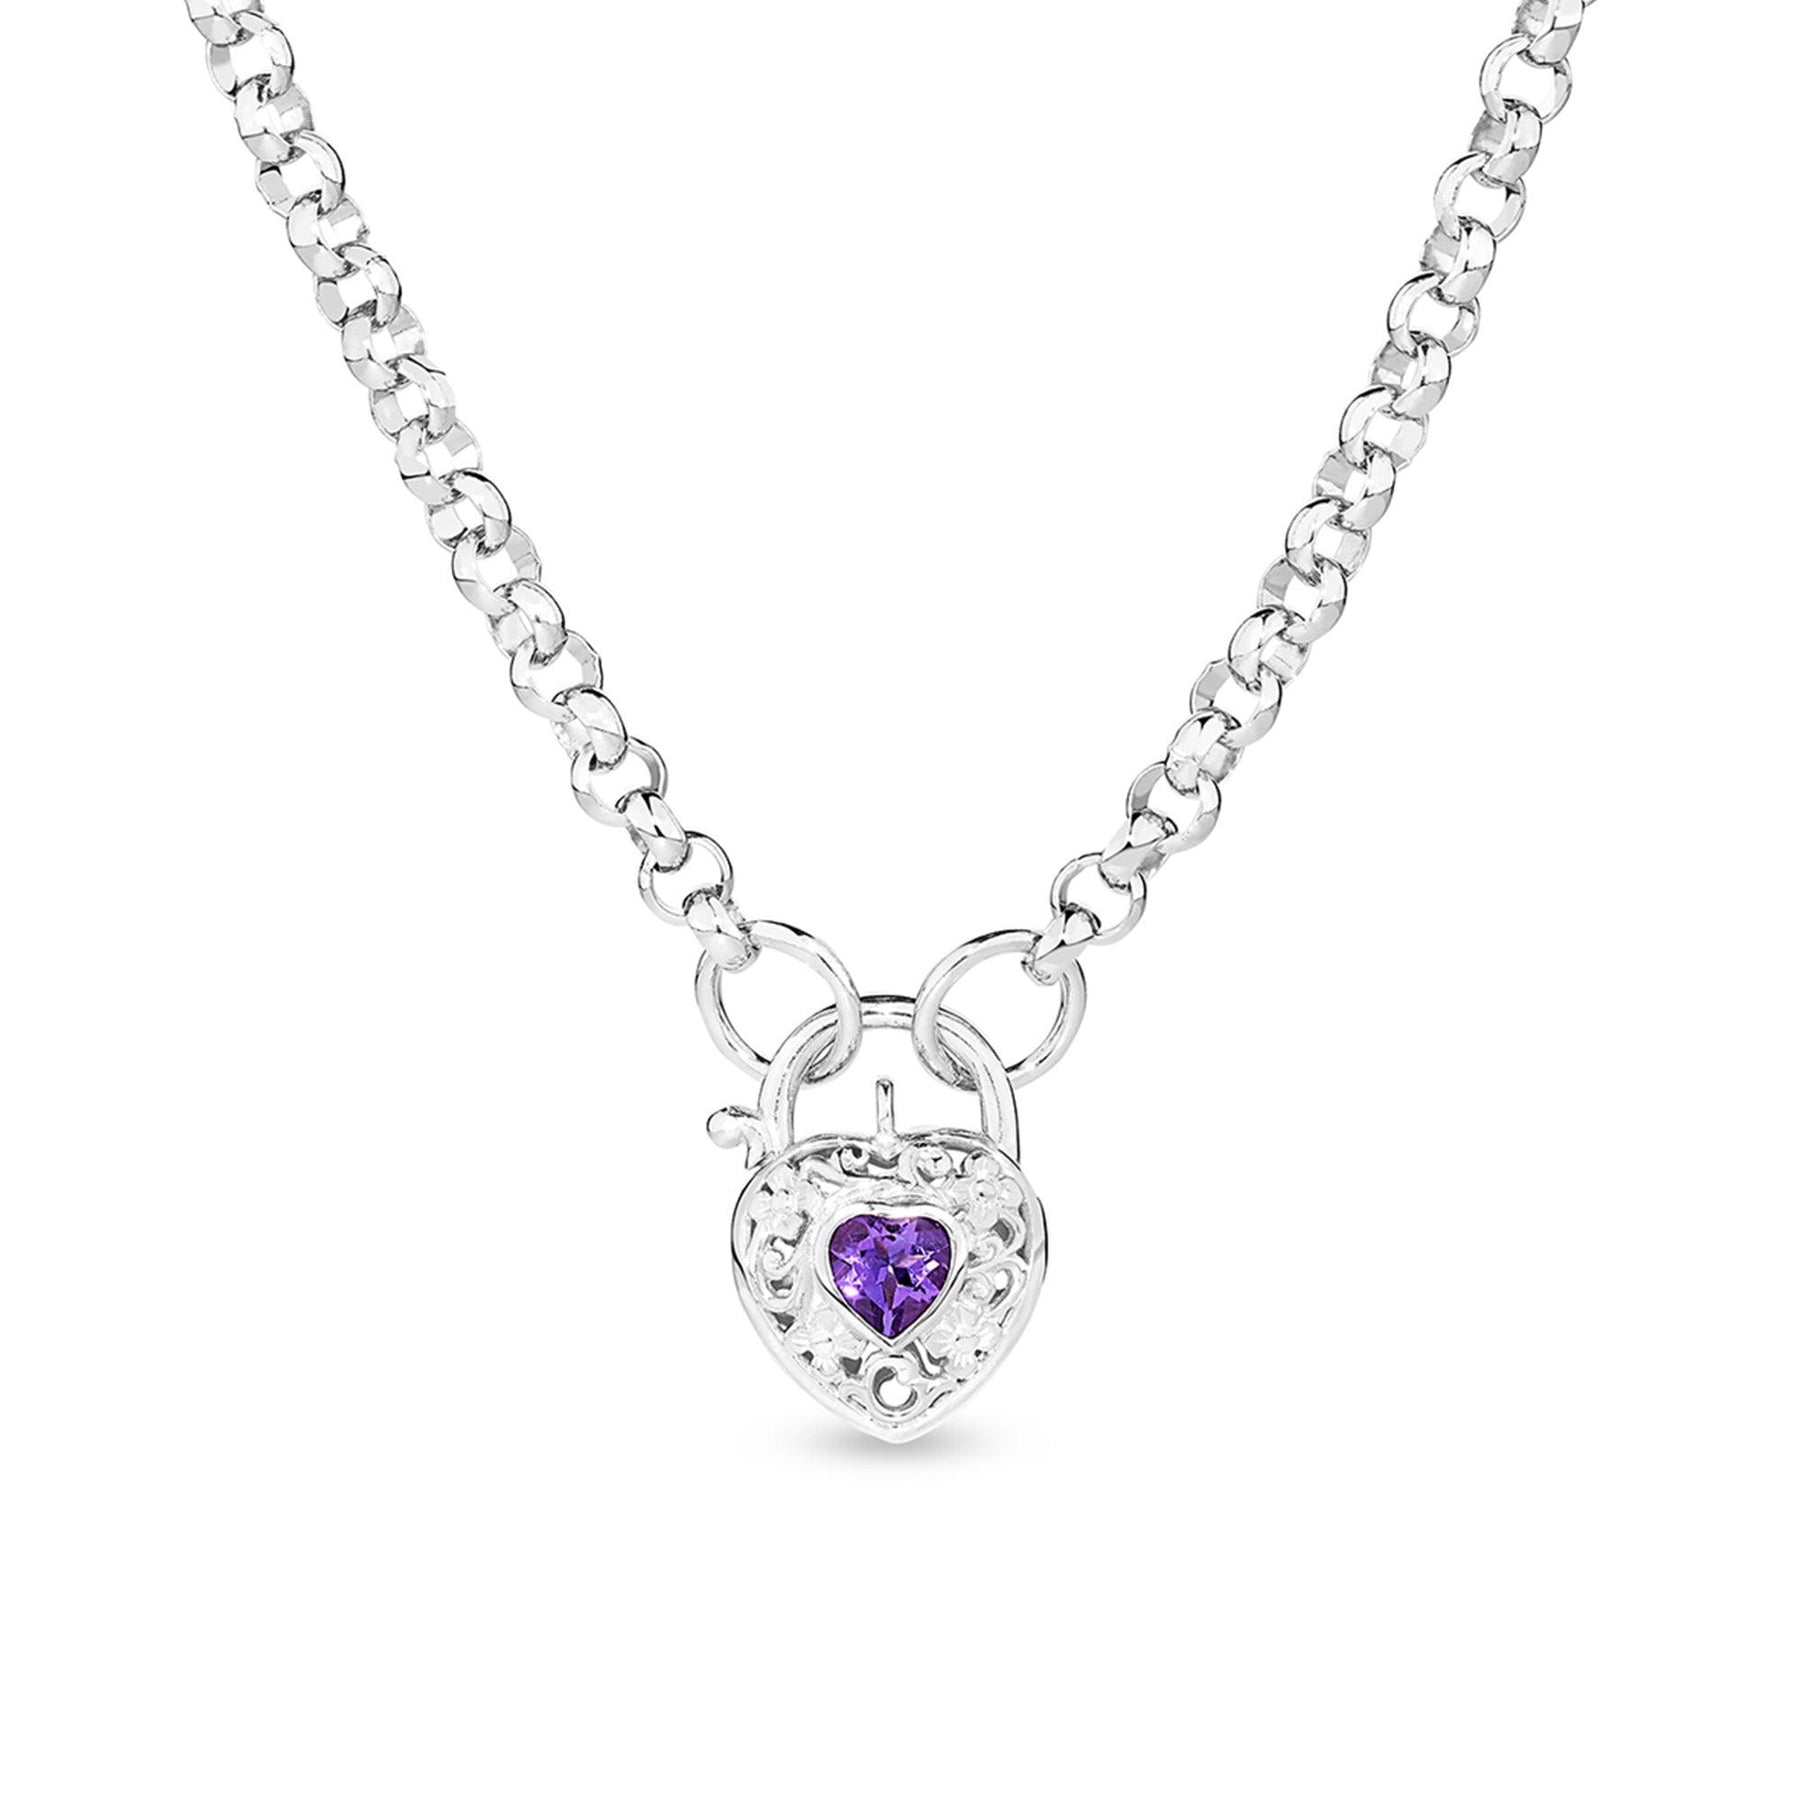 Amethyst Filigree Heart Padlock Necklace in Sterling Silver - Wallace Bishop